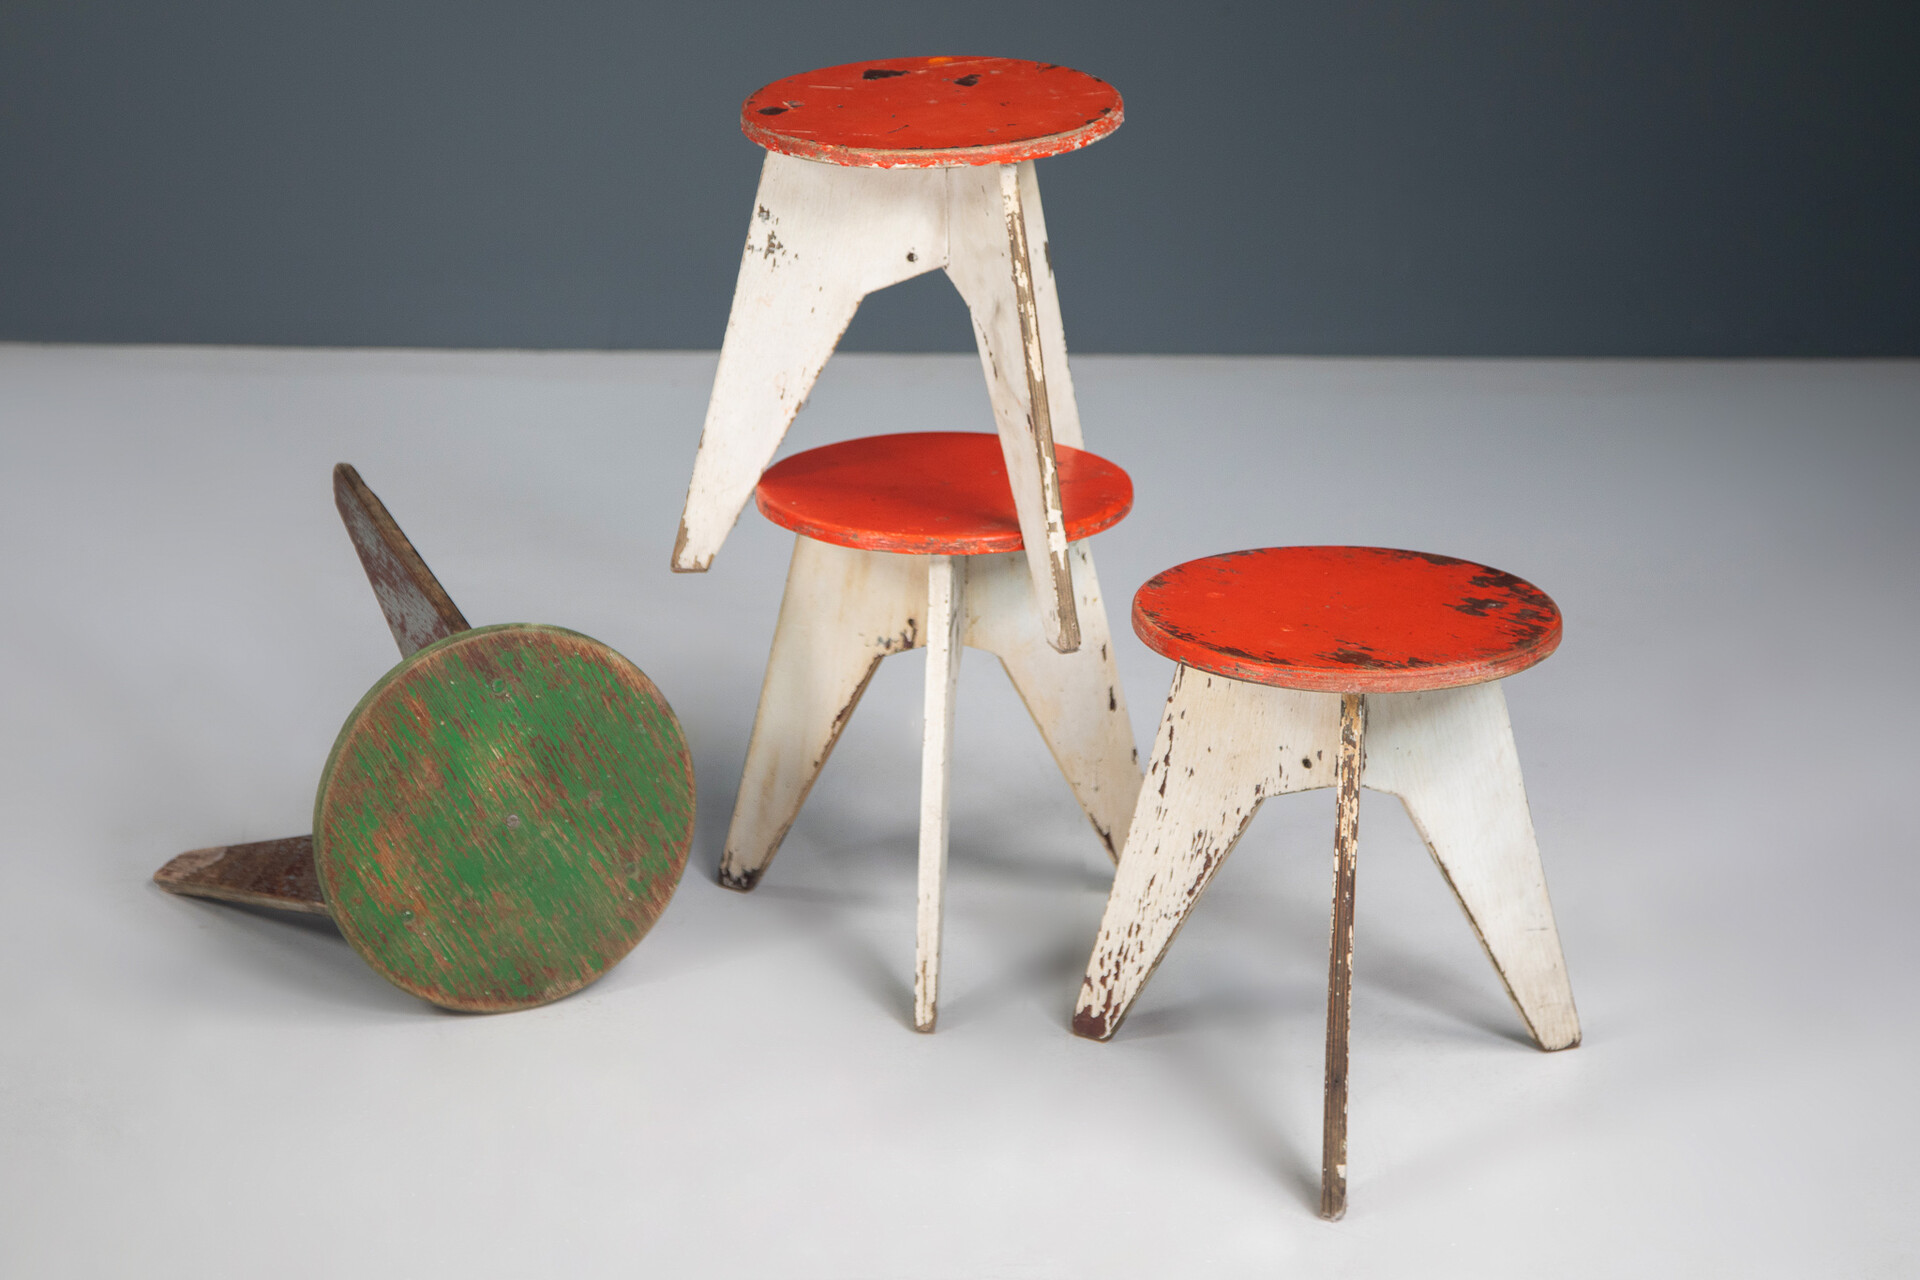 Mid century modern Set of 4 Tabouret Stools in the style of Jean Prouvé , France 1950s Mid-20th century